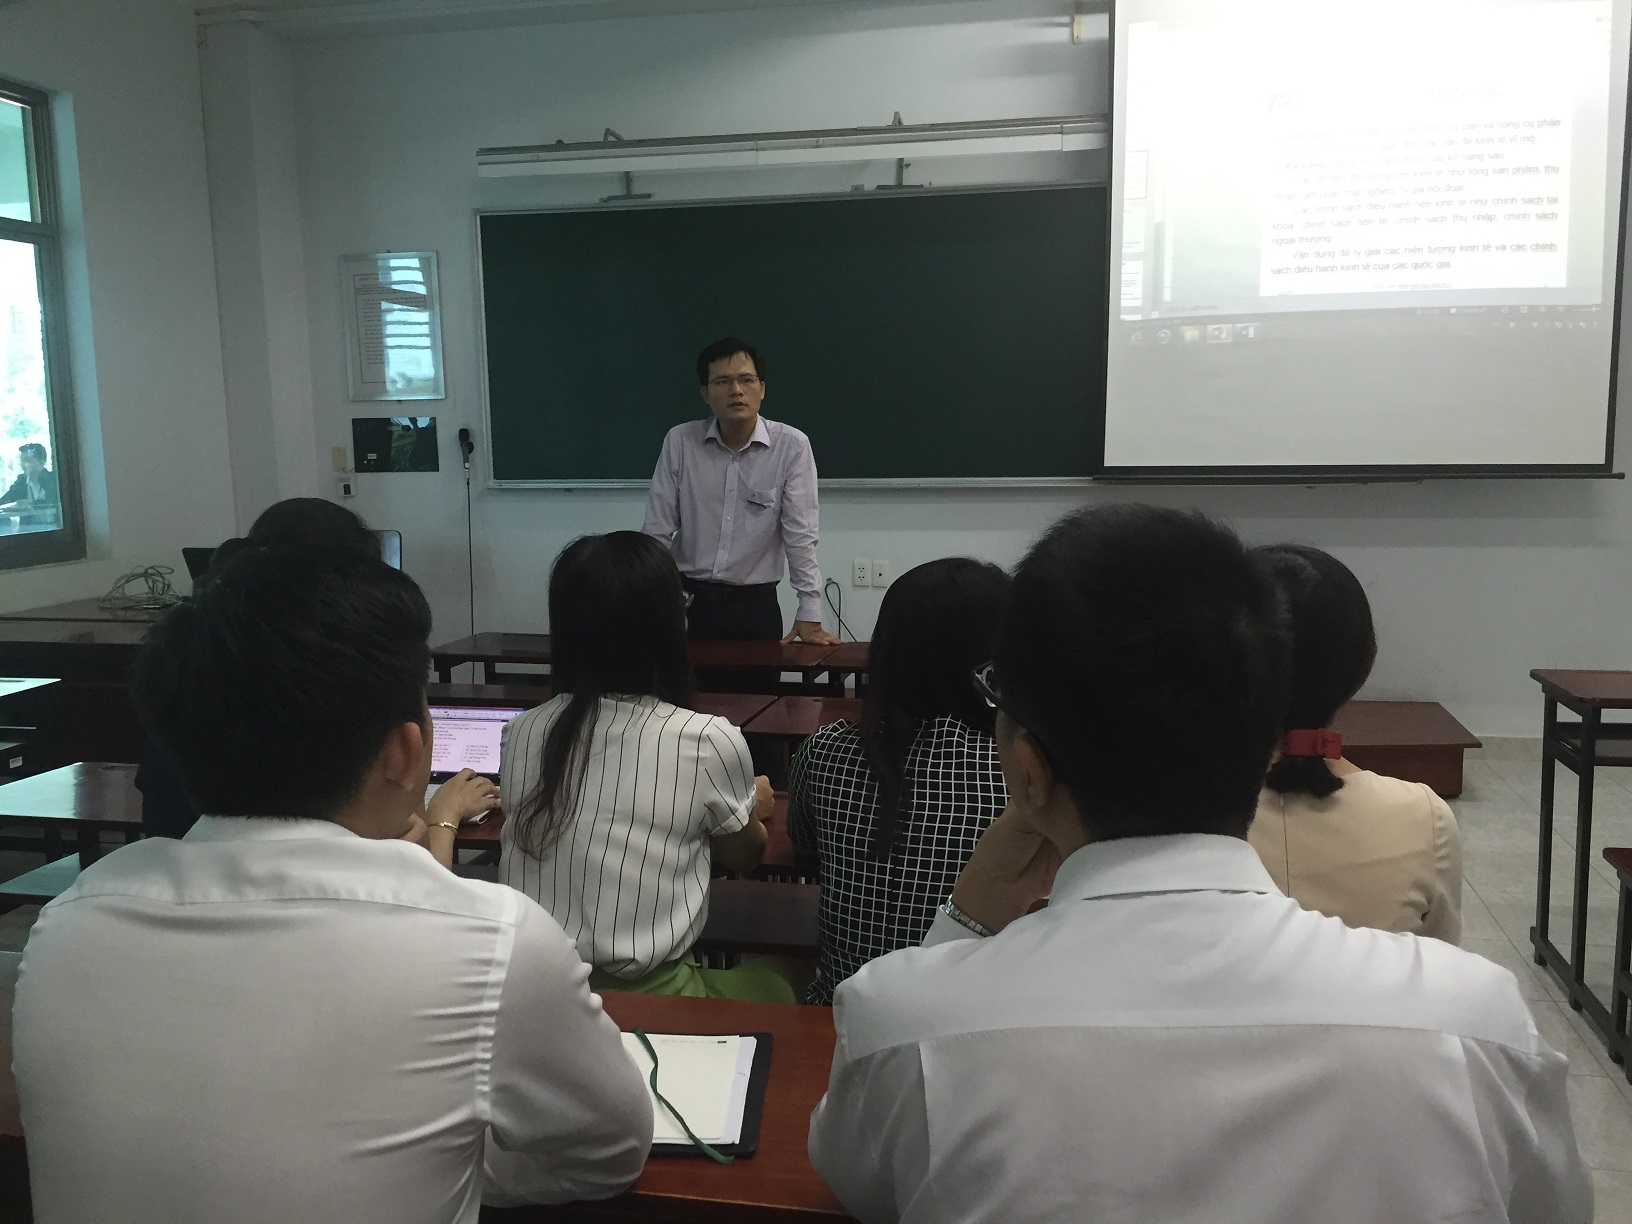 Dr. Le Thanh Tung is sharing teaching of Macro Economics module